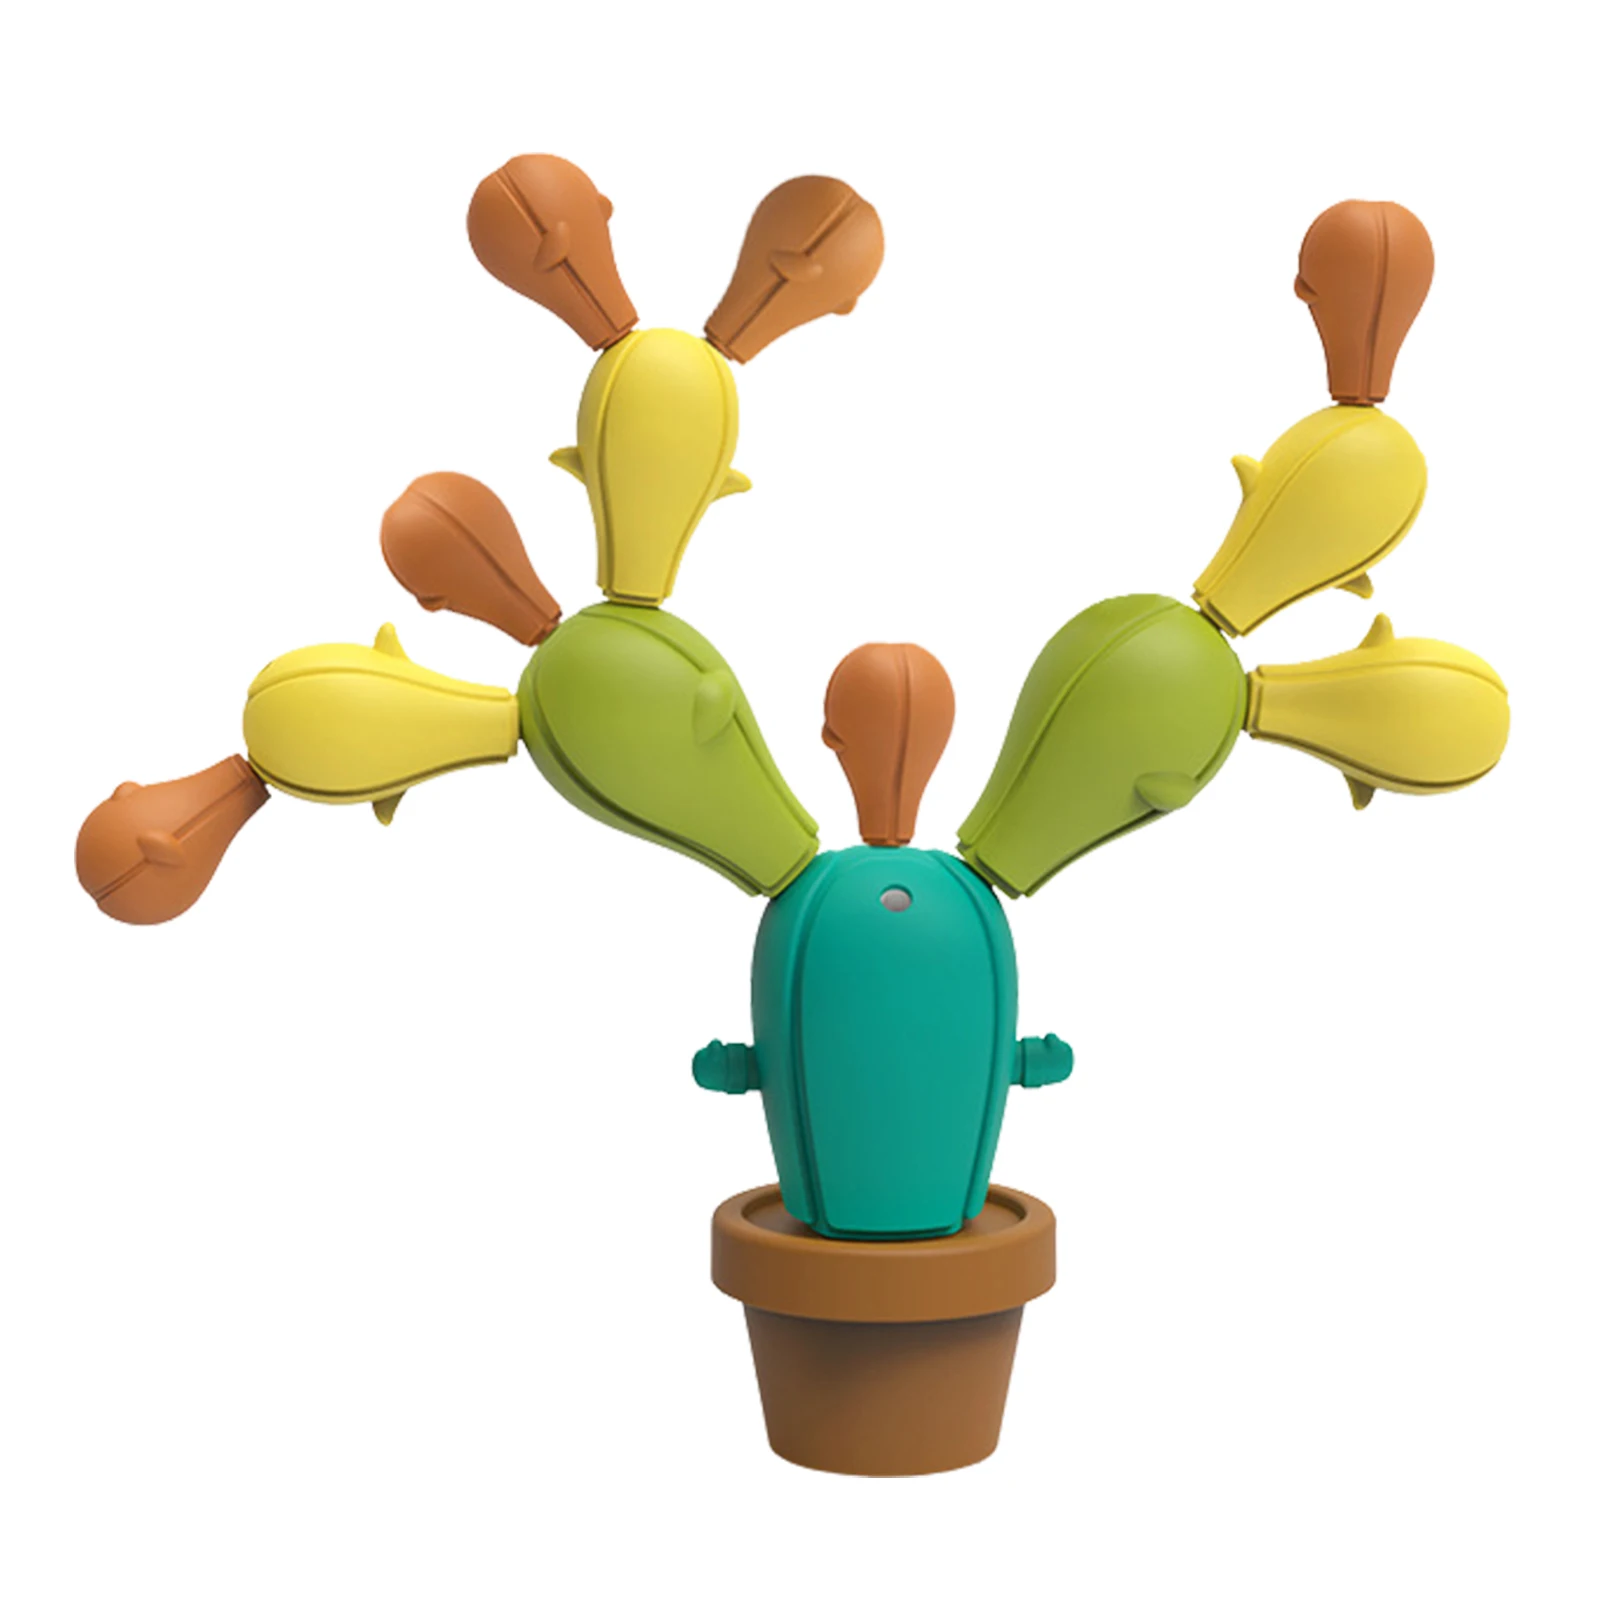 

Balancing Cactus Stacking Toy Build And Stack Cactus Blocks Fun Sorting Stacking Cactus Building Blocks 3D Puzzle STEM Learning